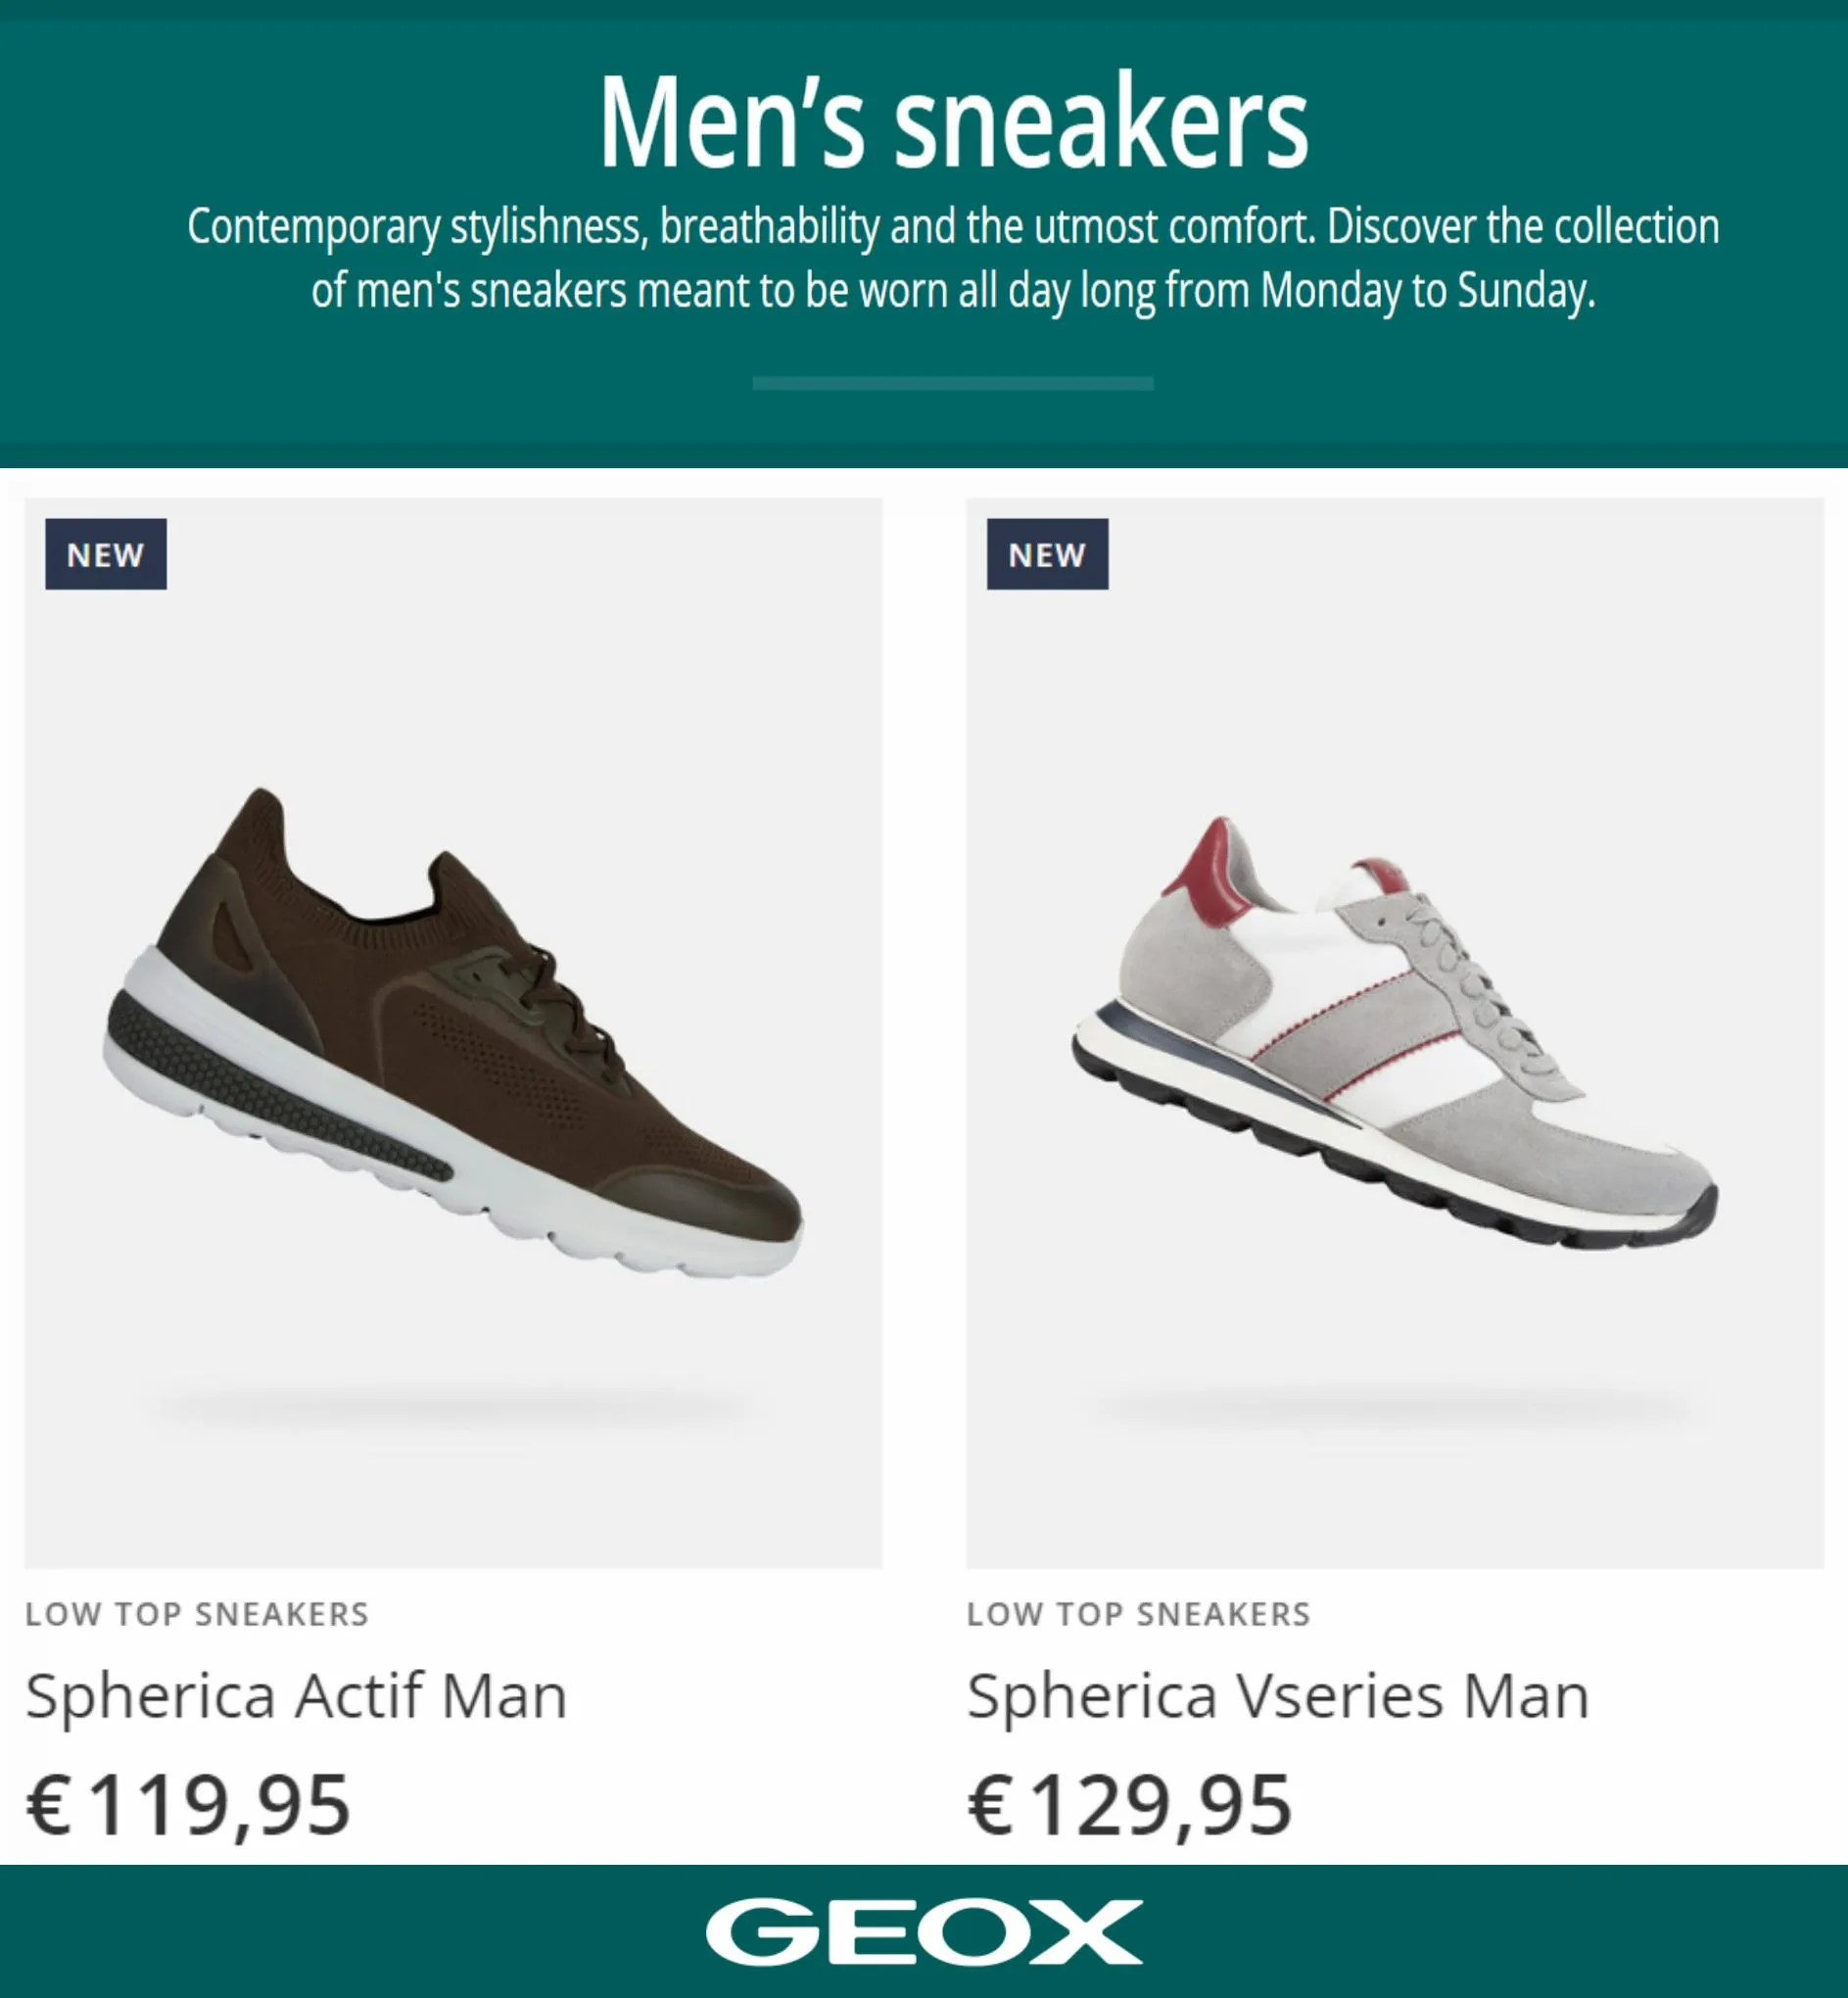 Catalogue Men's Sneakers, page 00002